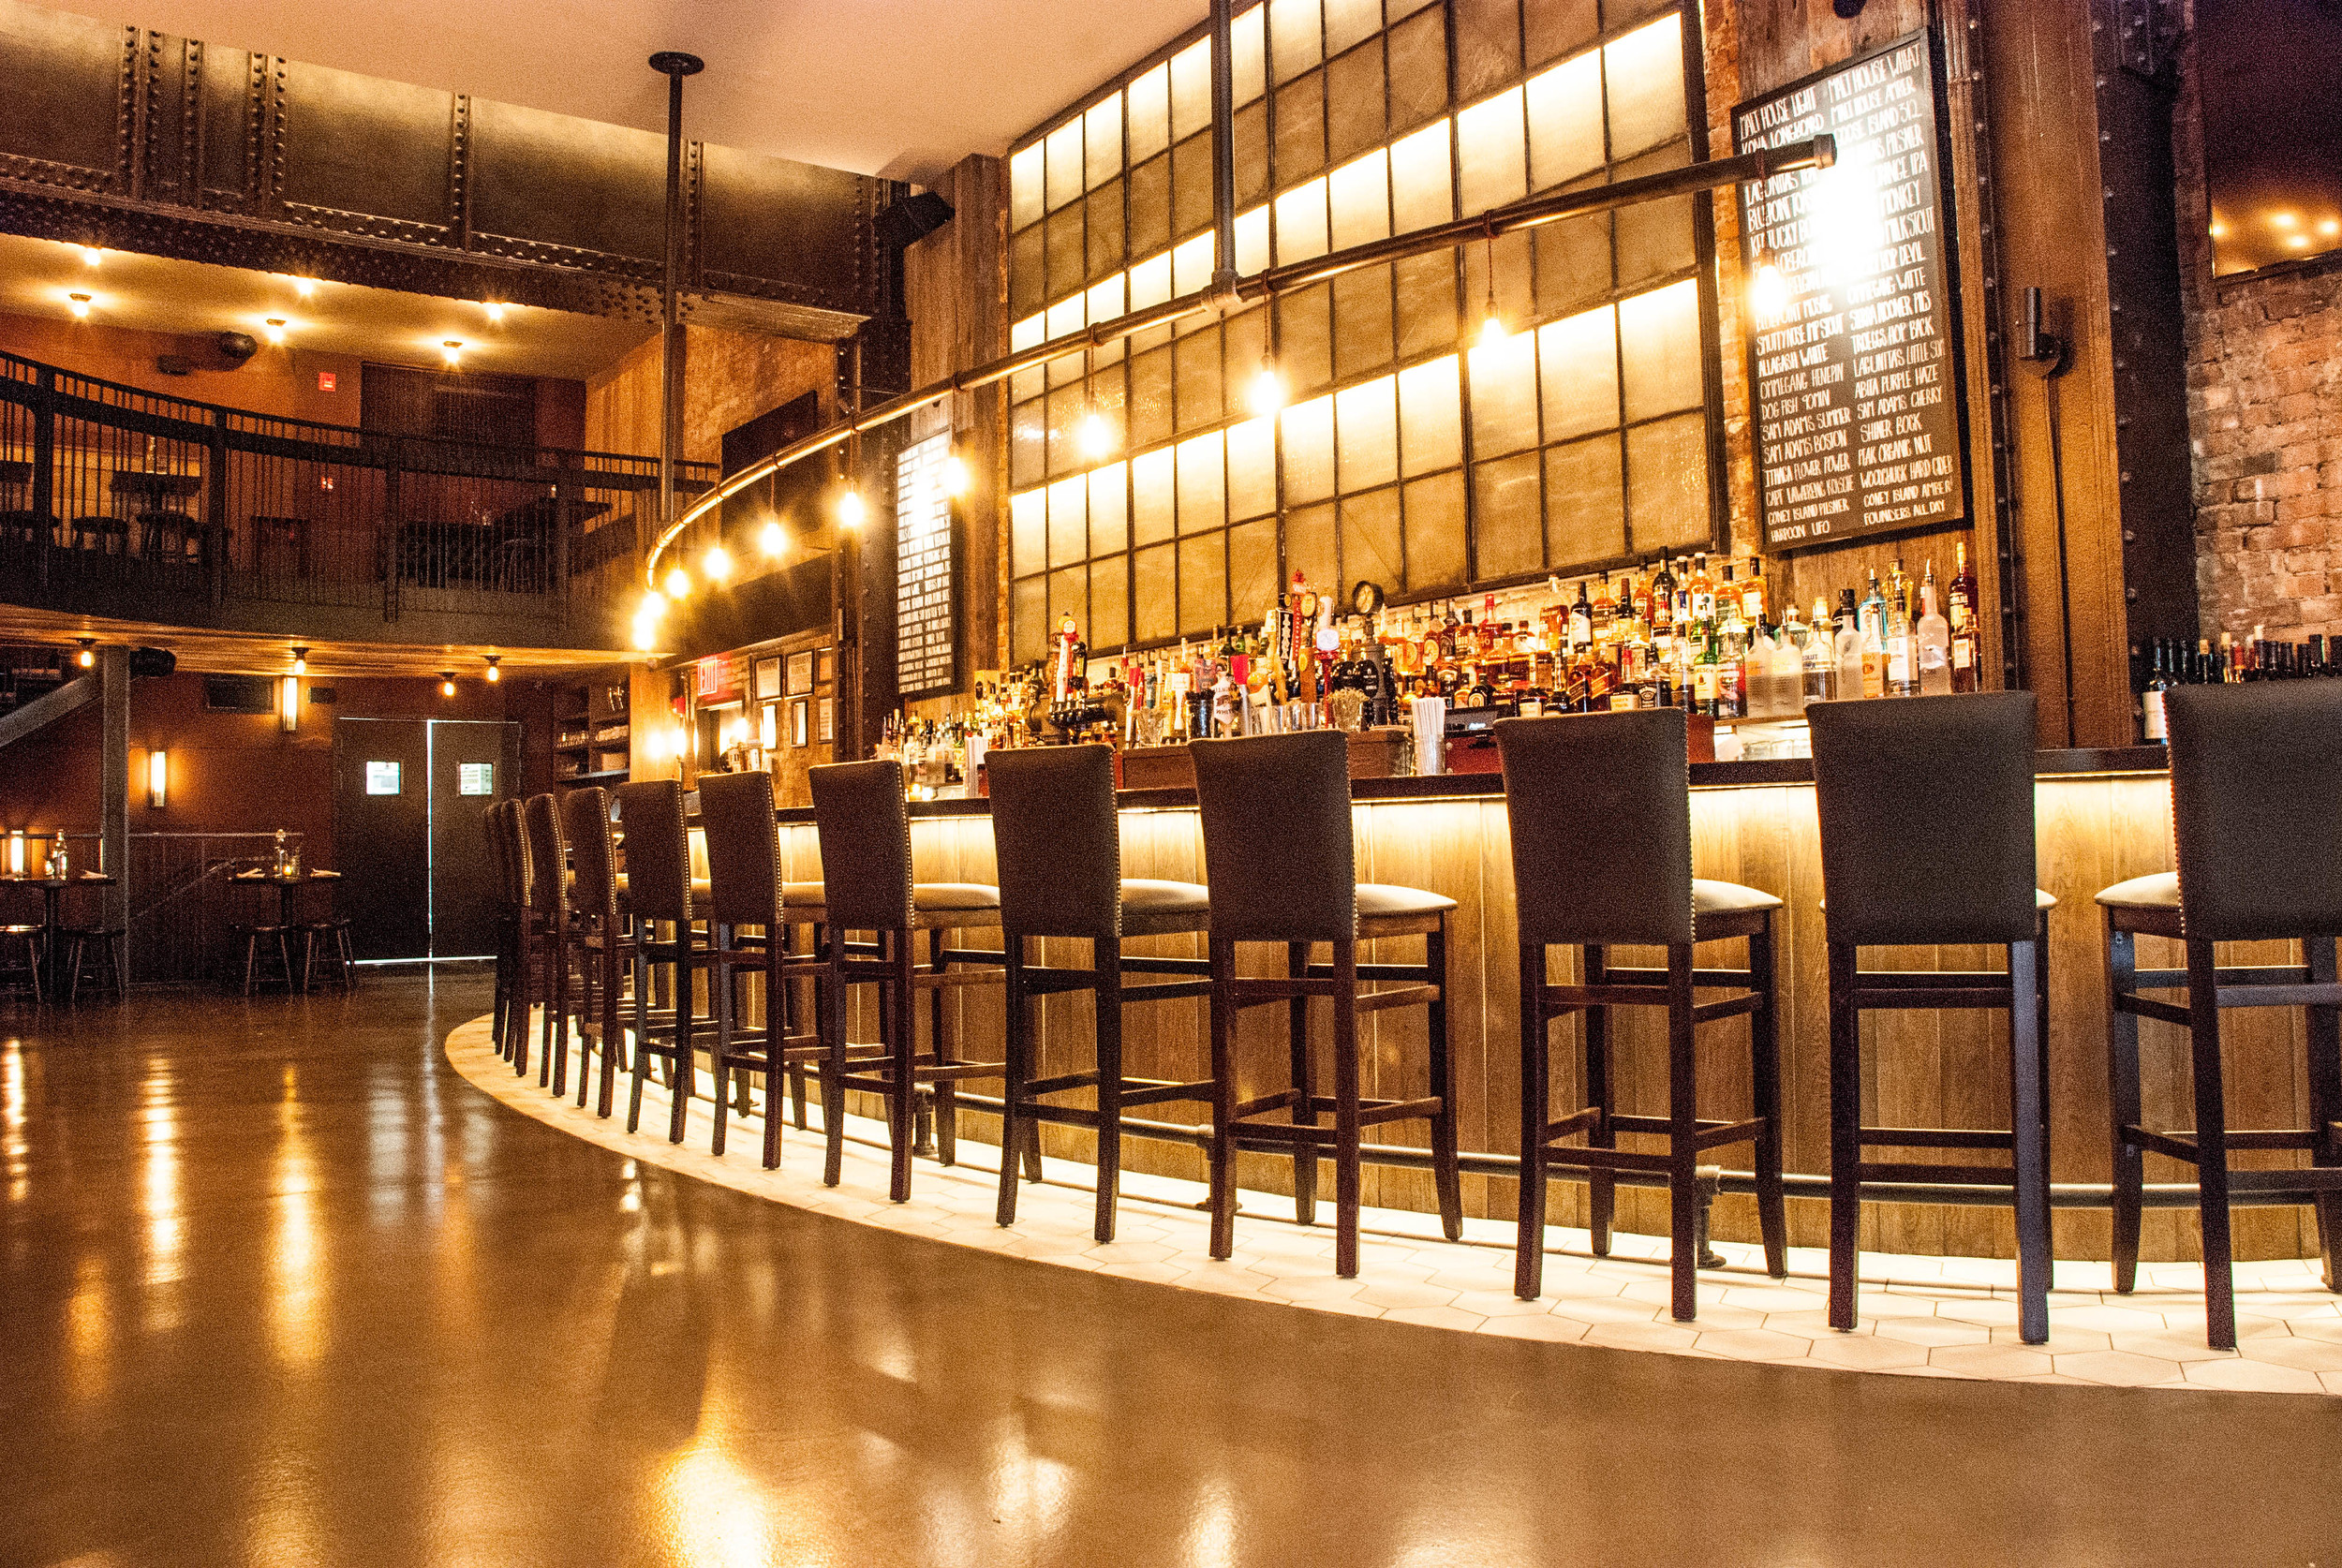 The Malt House
Best bars in Fidi NYC